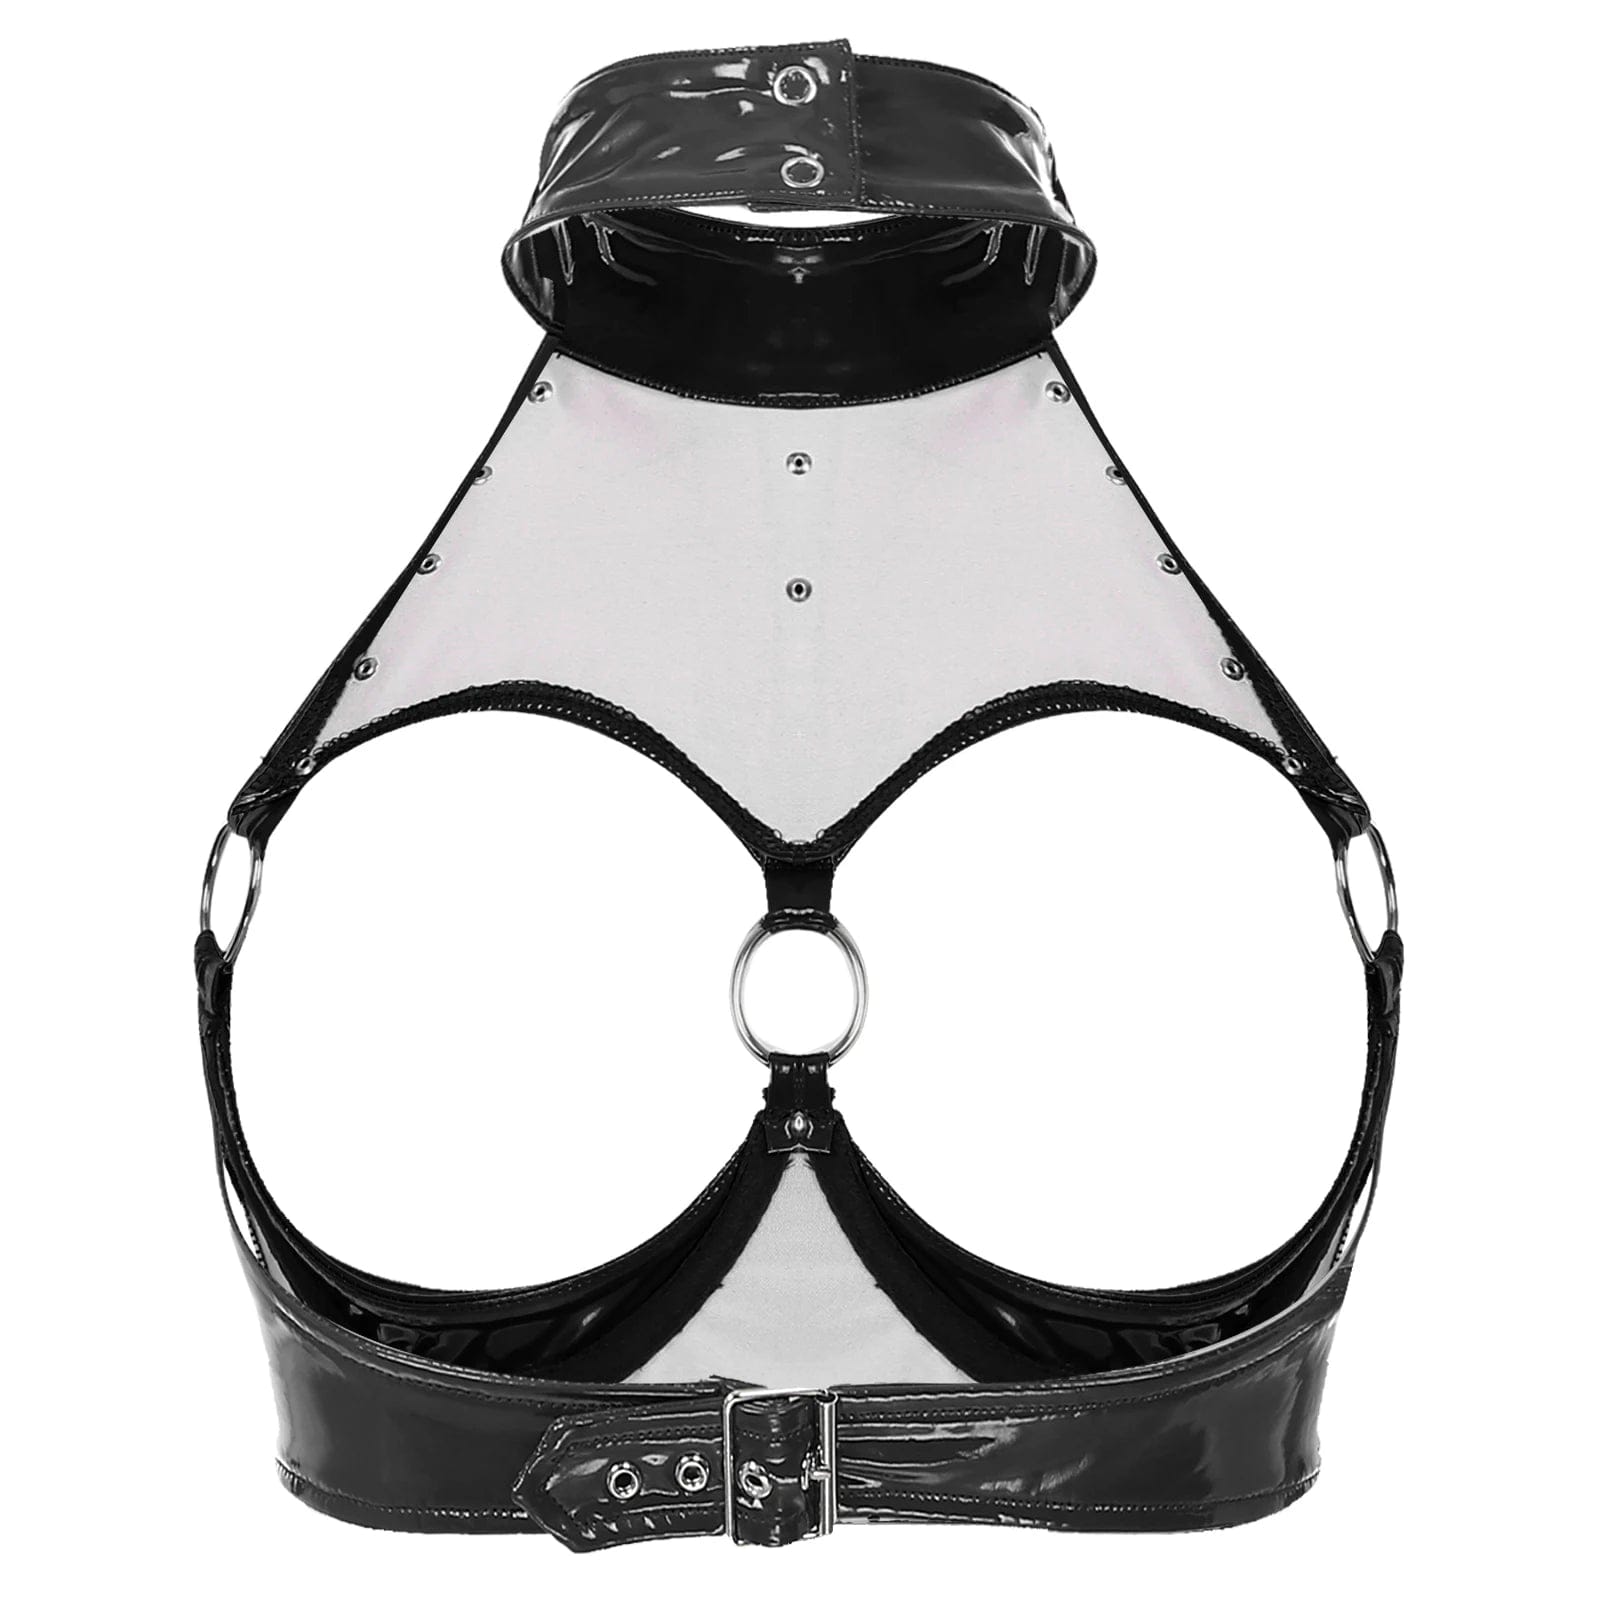 Rivet O Ring Open Cup Bra High Quality and Unique – Kinky Cloth